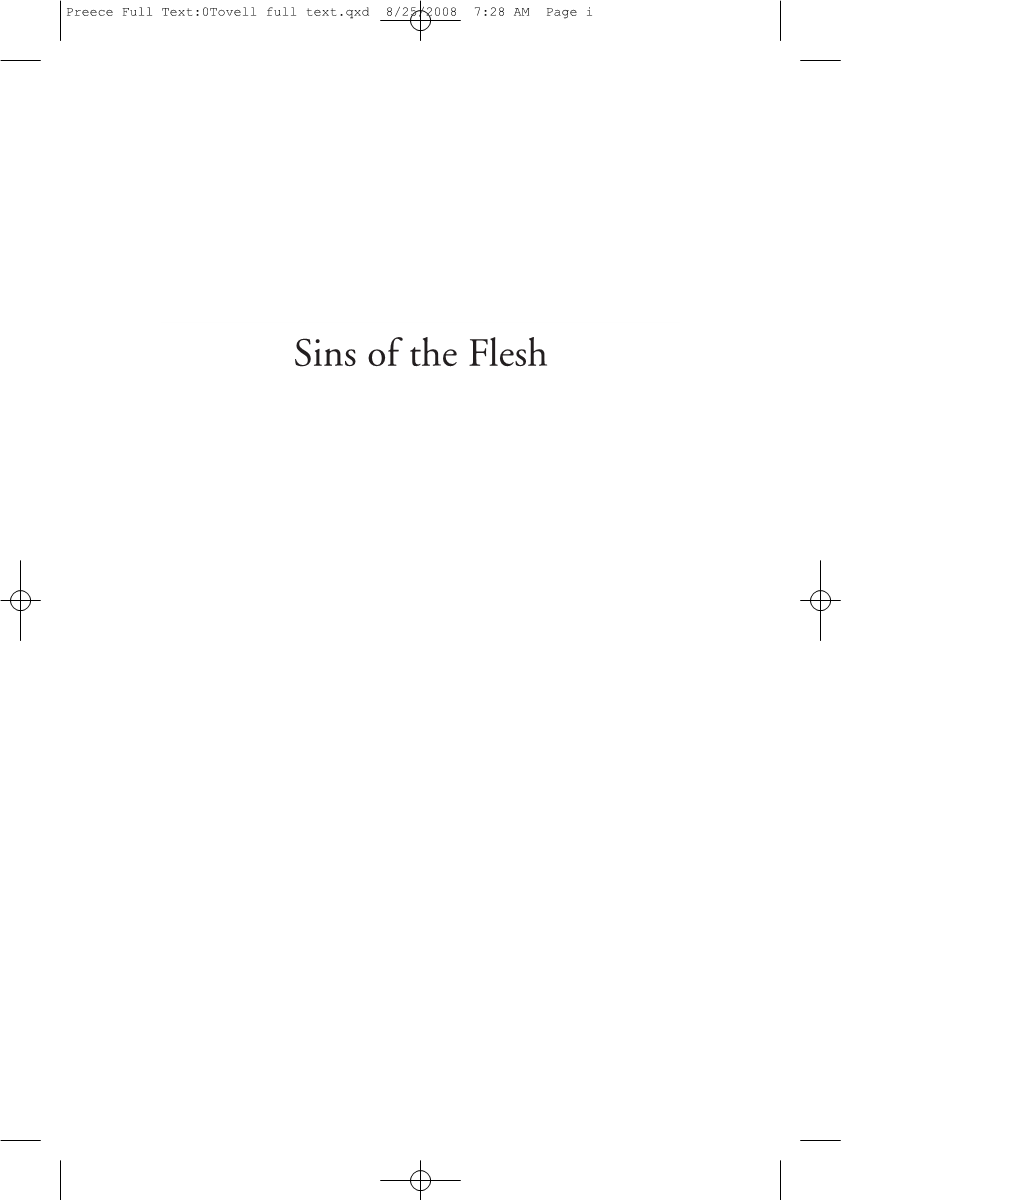 Sins of the Flesh Preece Full Text:0Tovell Full Text.Qxd 8/25/2008 7:28 AM Page Ii Preece Full Text:0Tovell Full Text.Qxd 8/25/2008 7:28 AM Page Iii